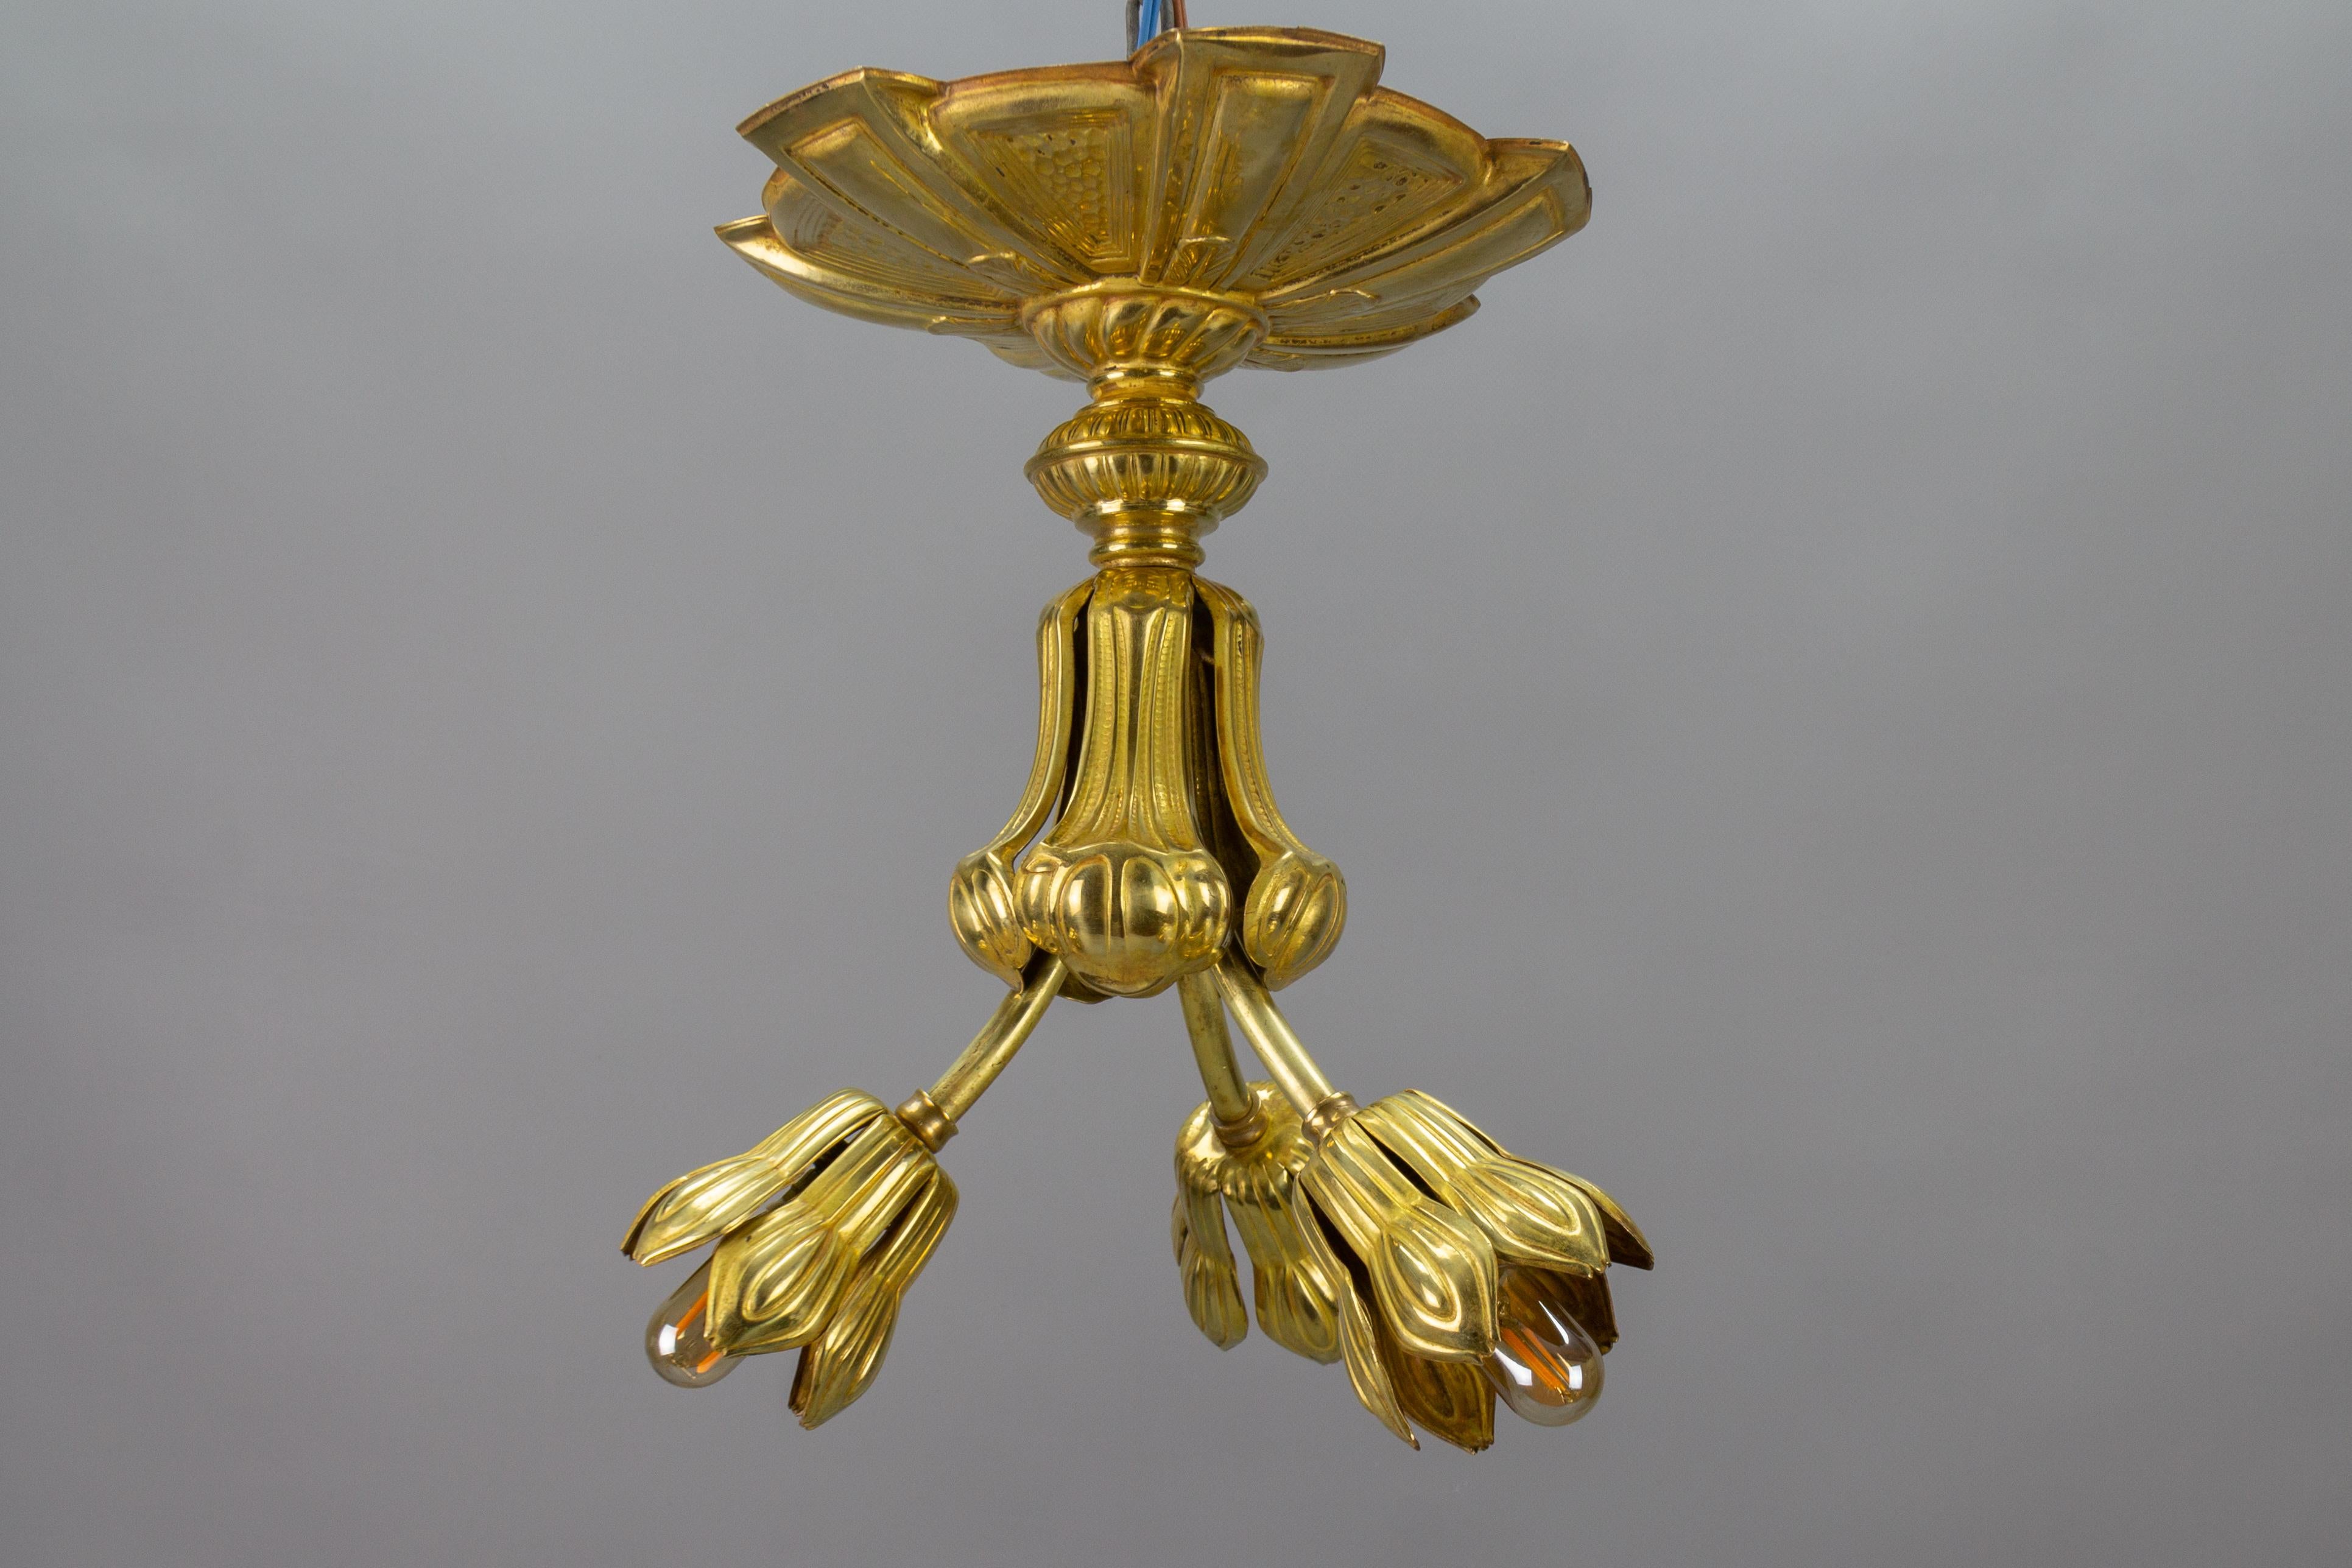 French Art Deco period three-light ceiling light fixture, from circa the 1920s.
This adorable and unusual Art Deco three-light ceiling lamp features an impressive and ornate ceiling canopy, and three brass arms each with a flower-shaped brass